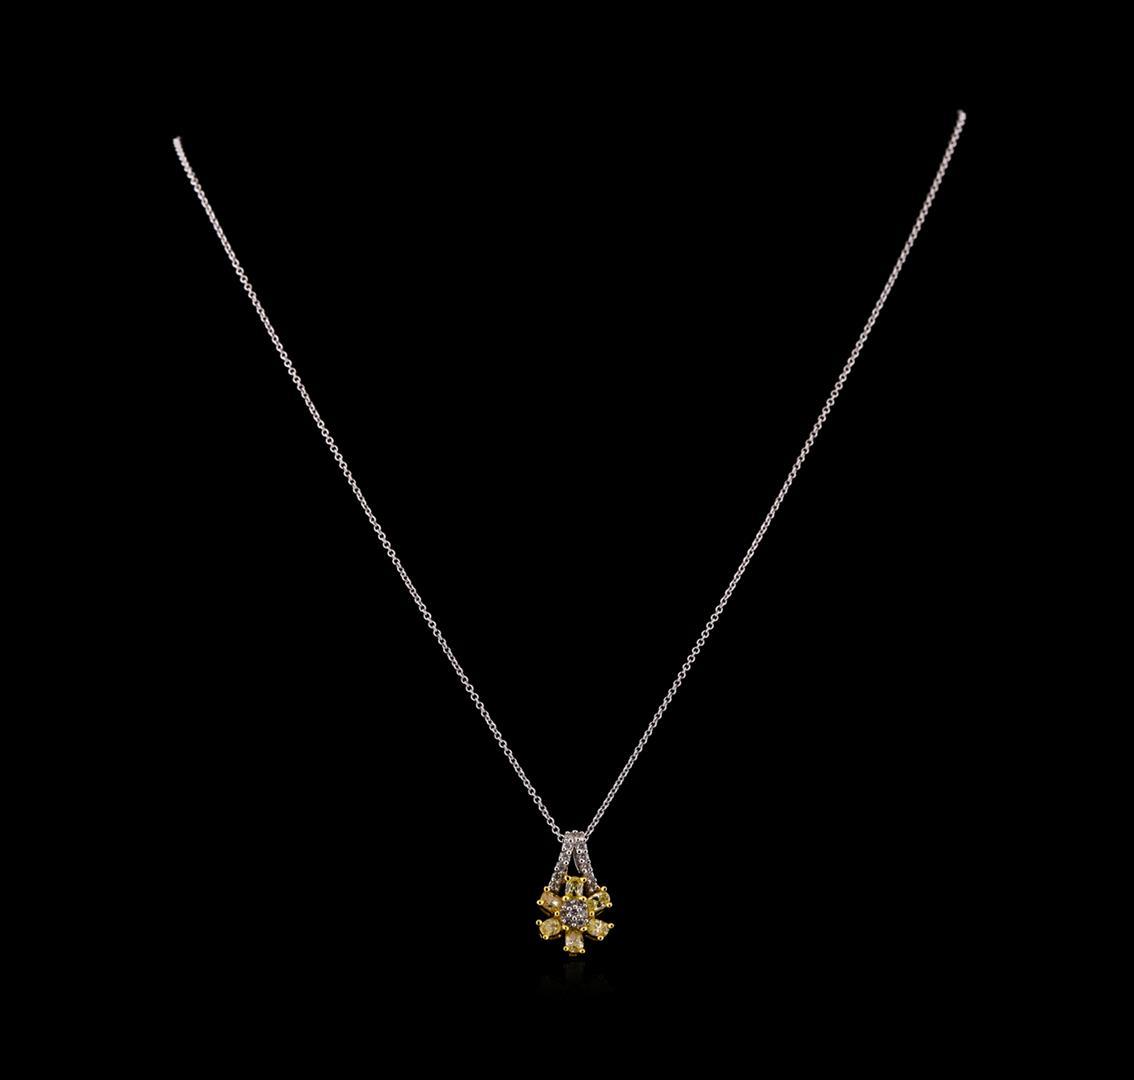 0.85 ctw Diamond Pendant With Chain - 18KT Two-Tone Gold